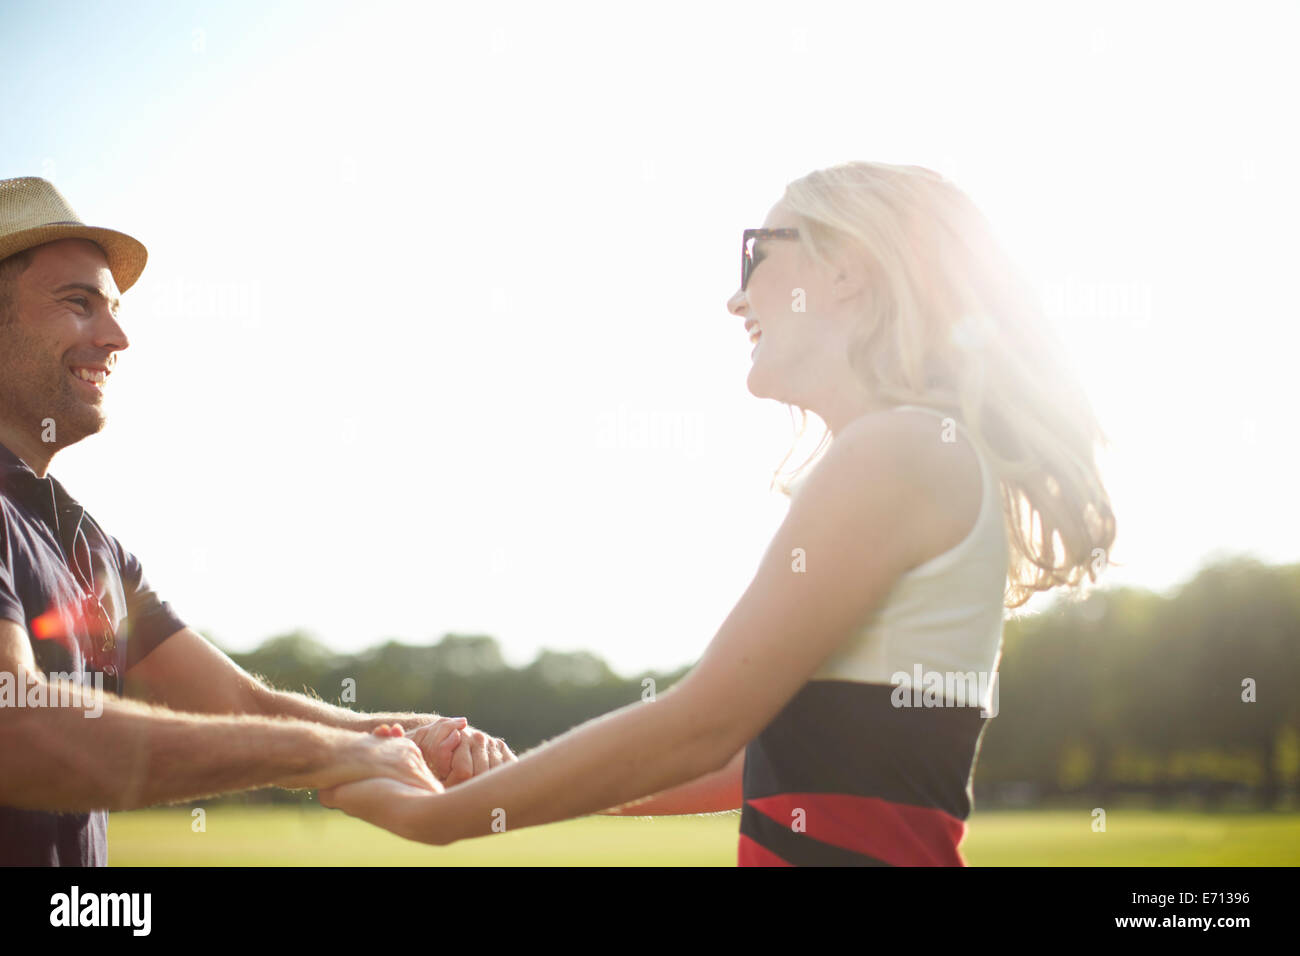 Couple swirling each other around in park Stock Photo